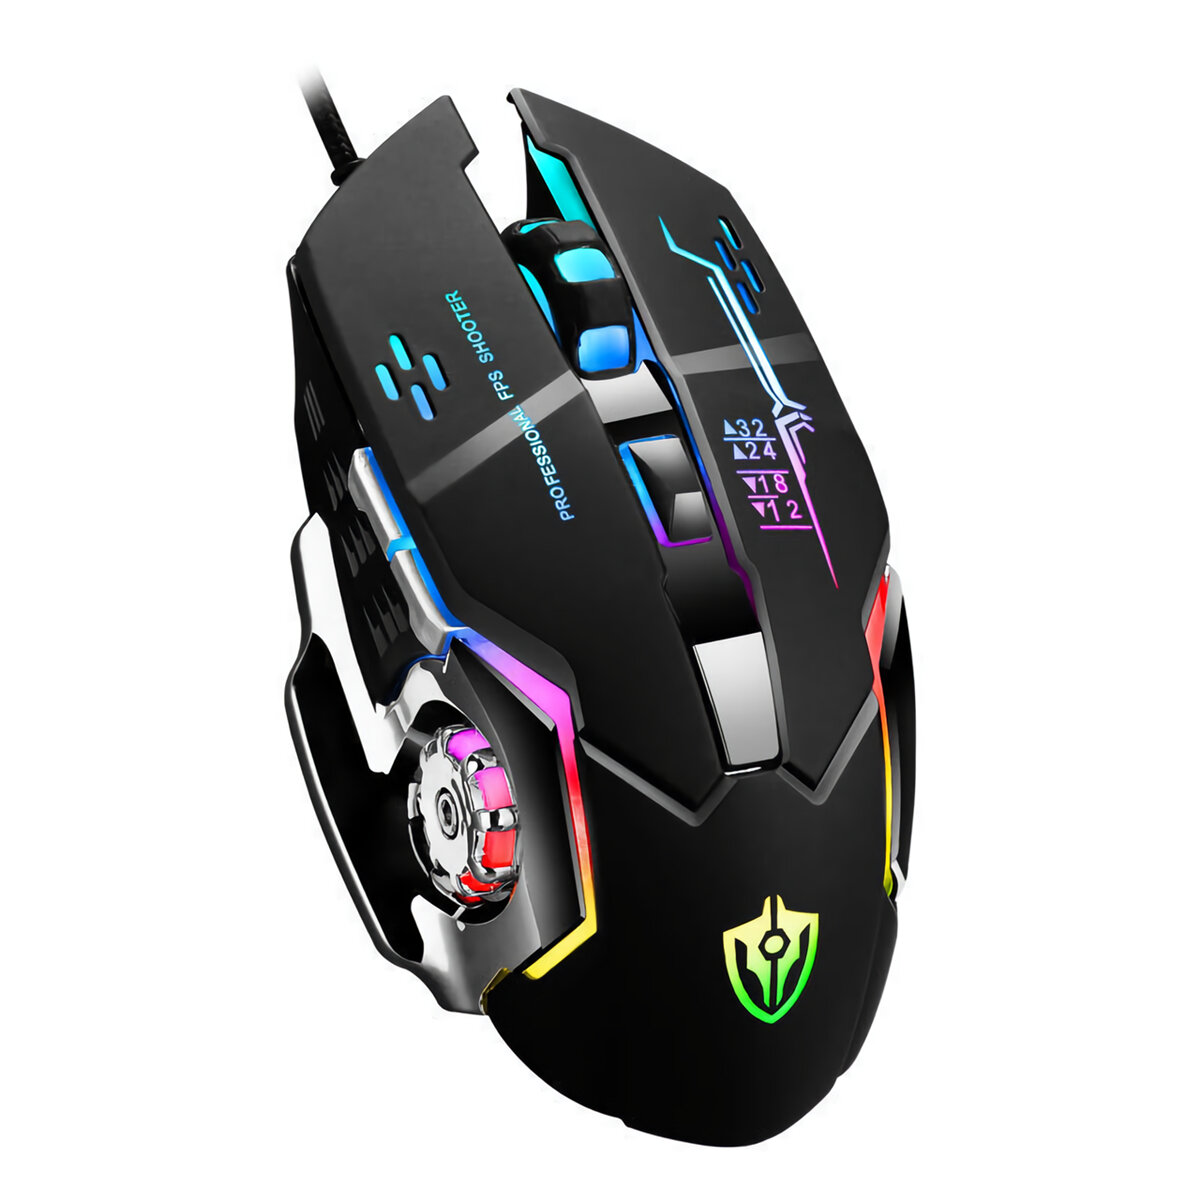 Shipadoo X7 Wired Gaming Mouse Metal Base 800-3200DPI 4 Colors Breathing Backlight Ergonomic Home Office Mice for Desktop Computer Laptop PC